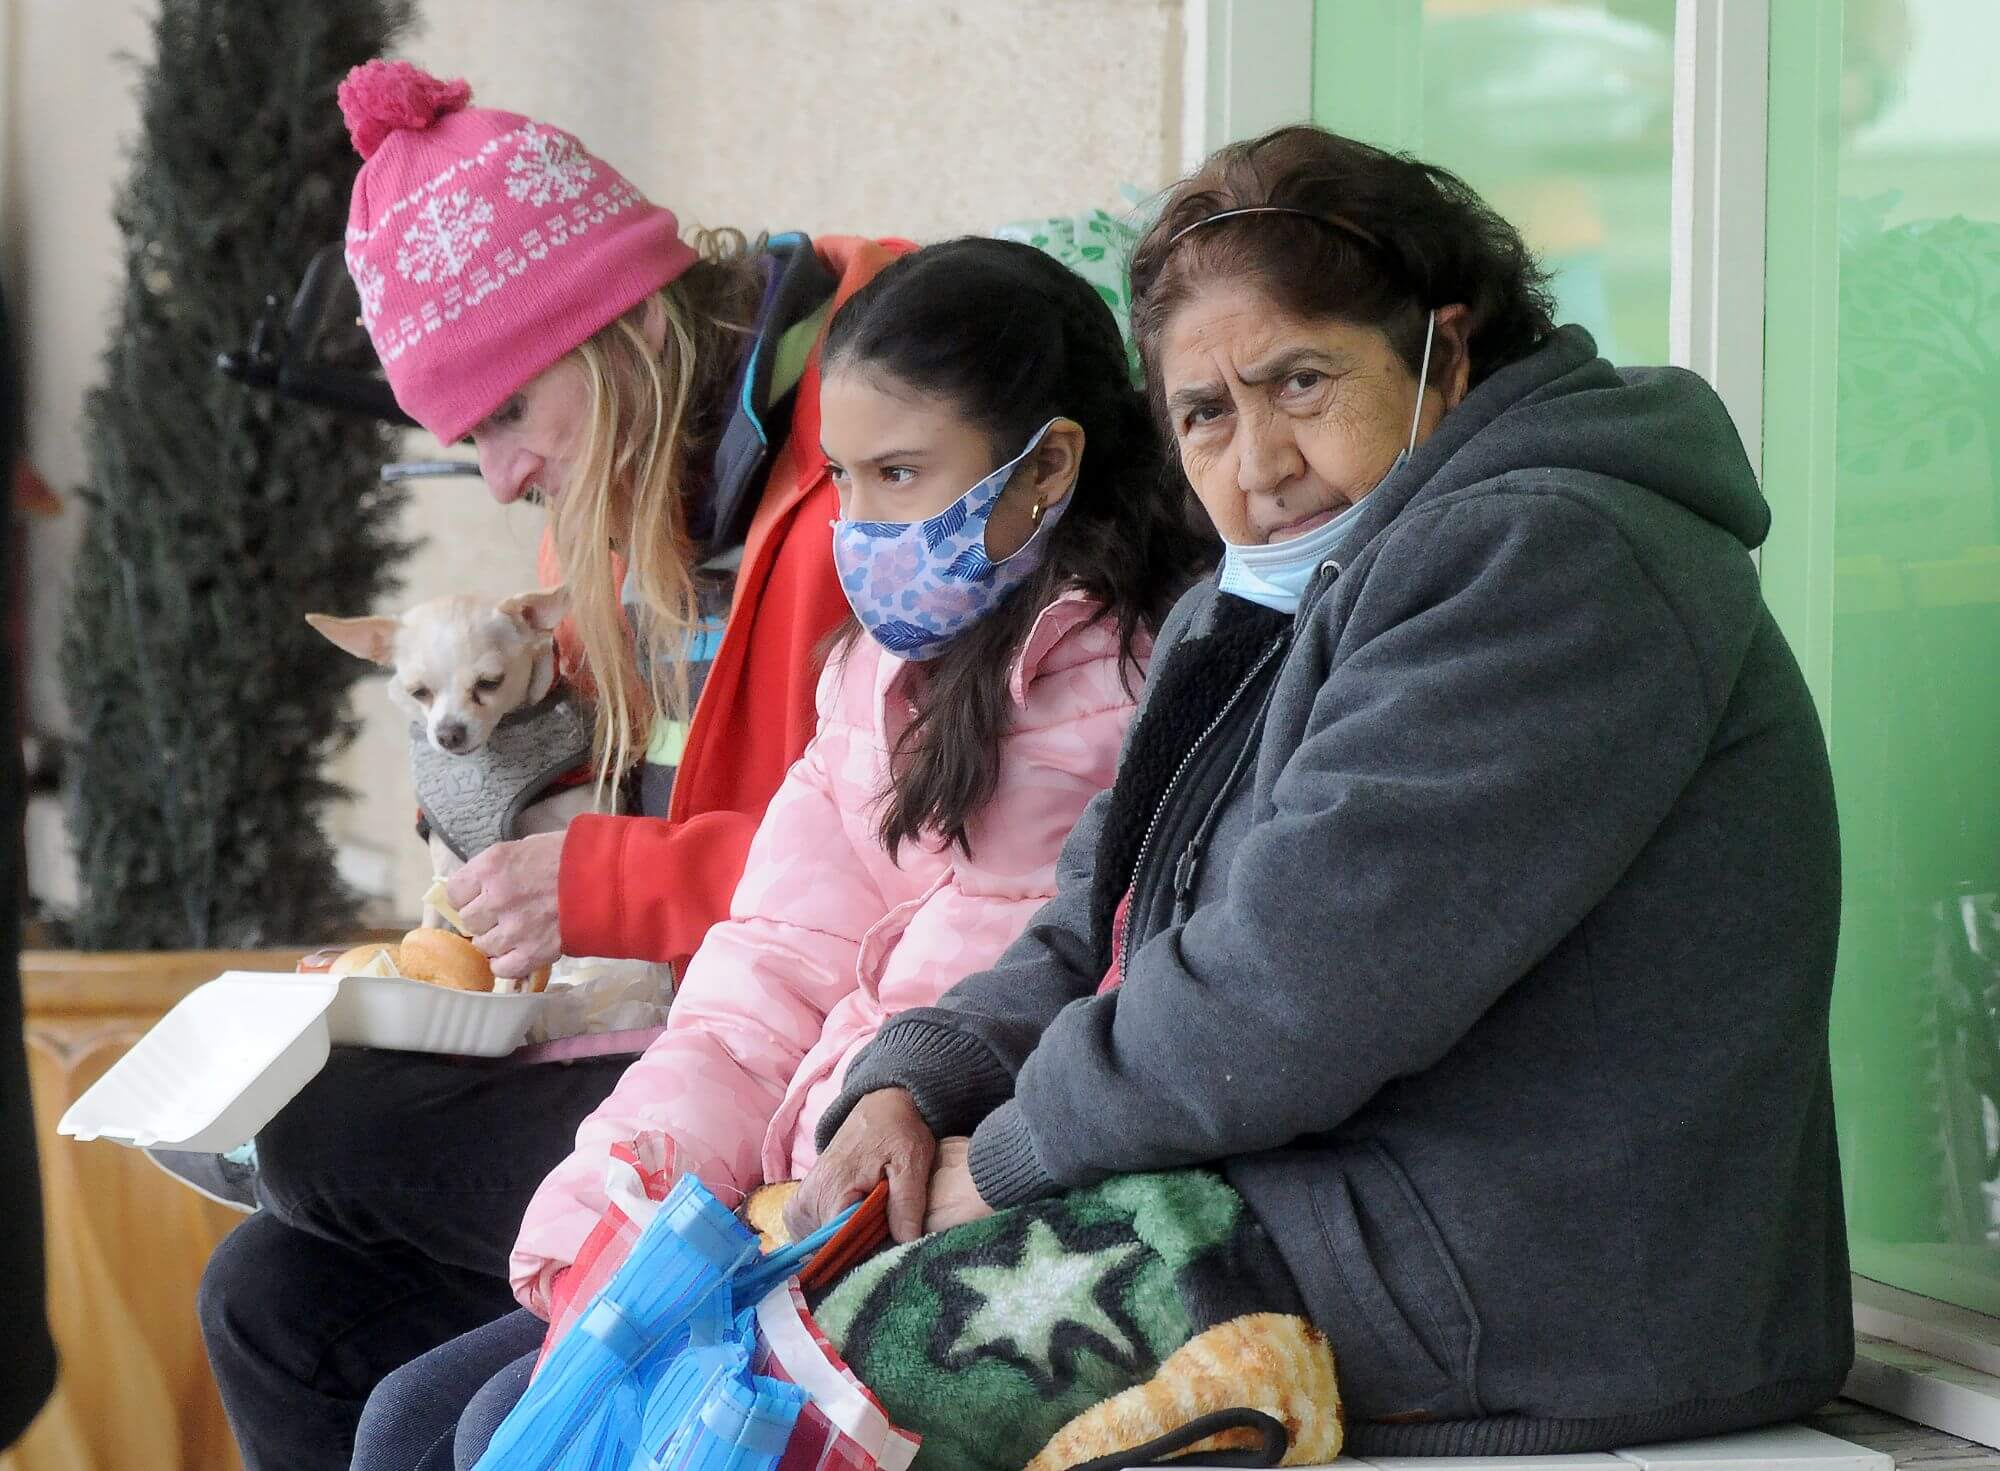 Three people sit on a bench, wearing coats and face masks.